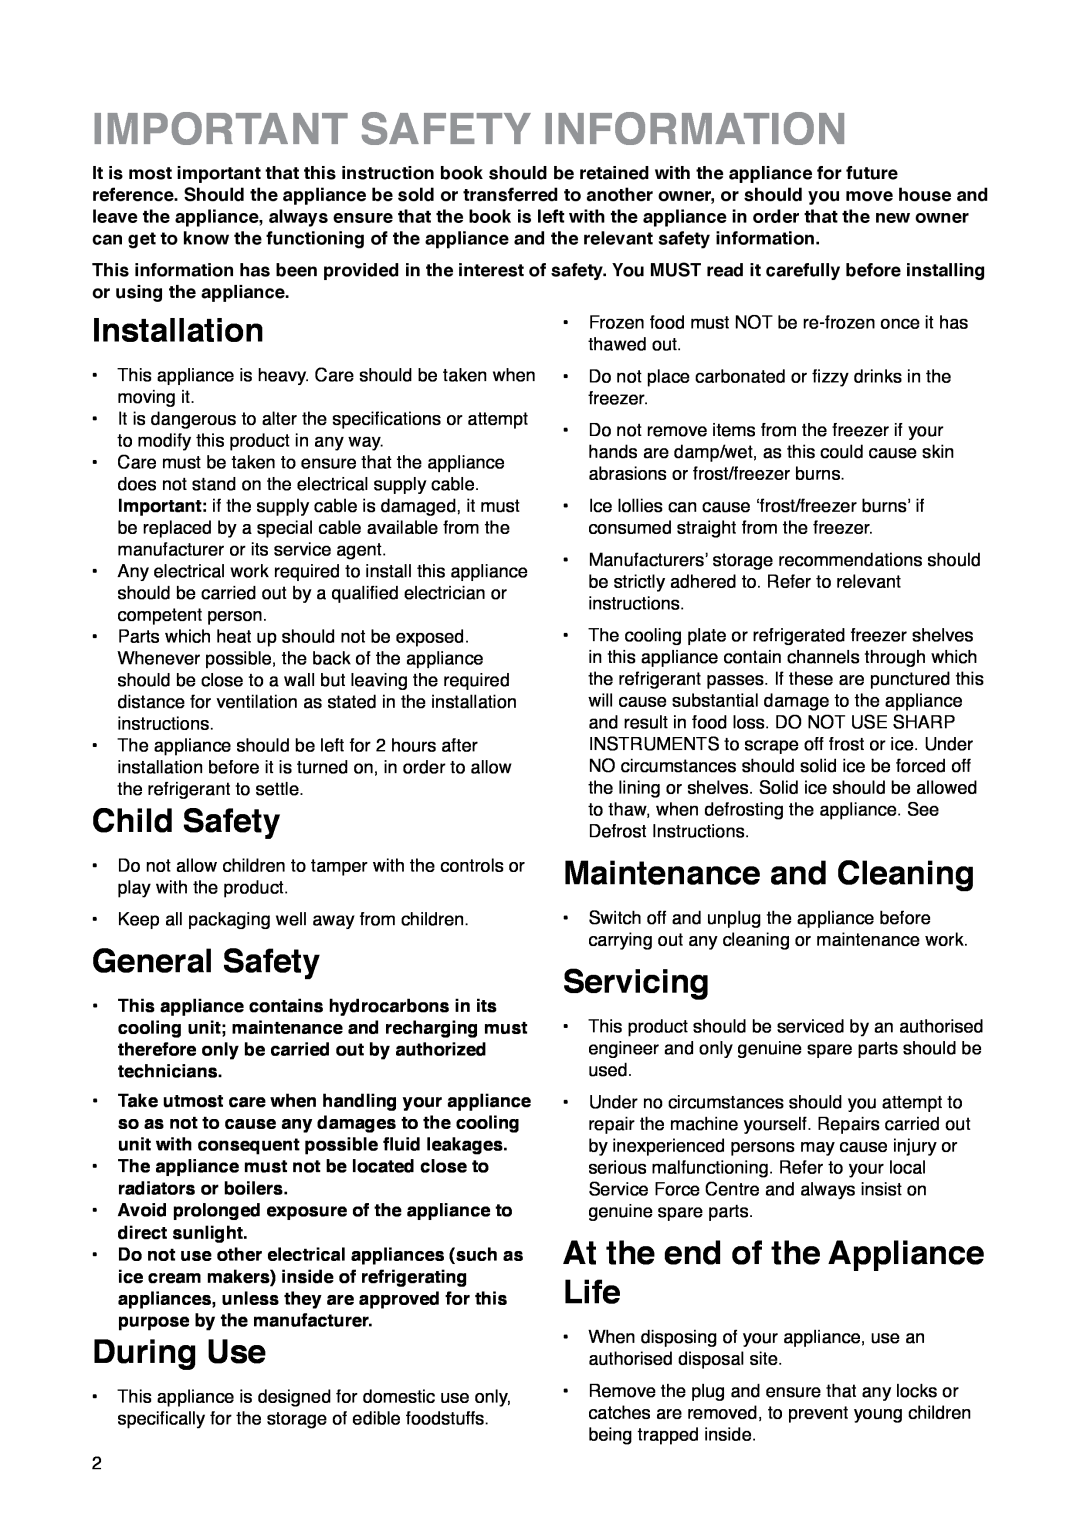 Zanussi ZCR 85 L manual Important Safety Information, Installation, Child Safety, General Safety, During Use, Servicing 